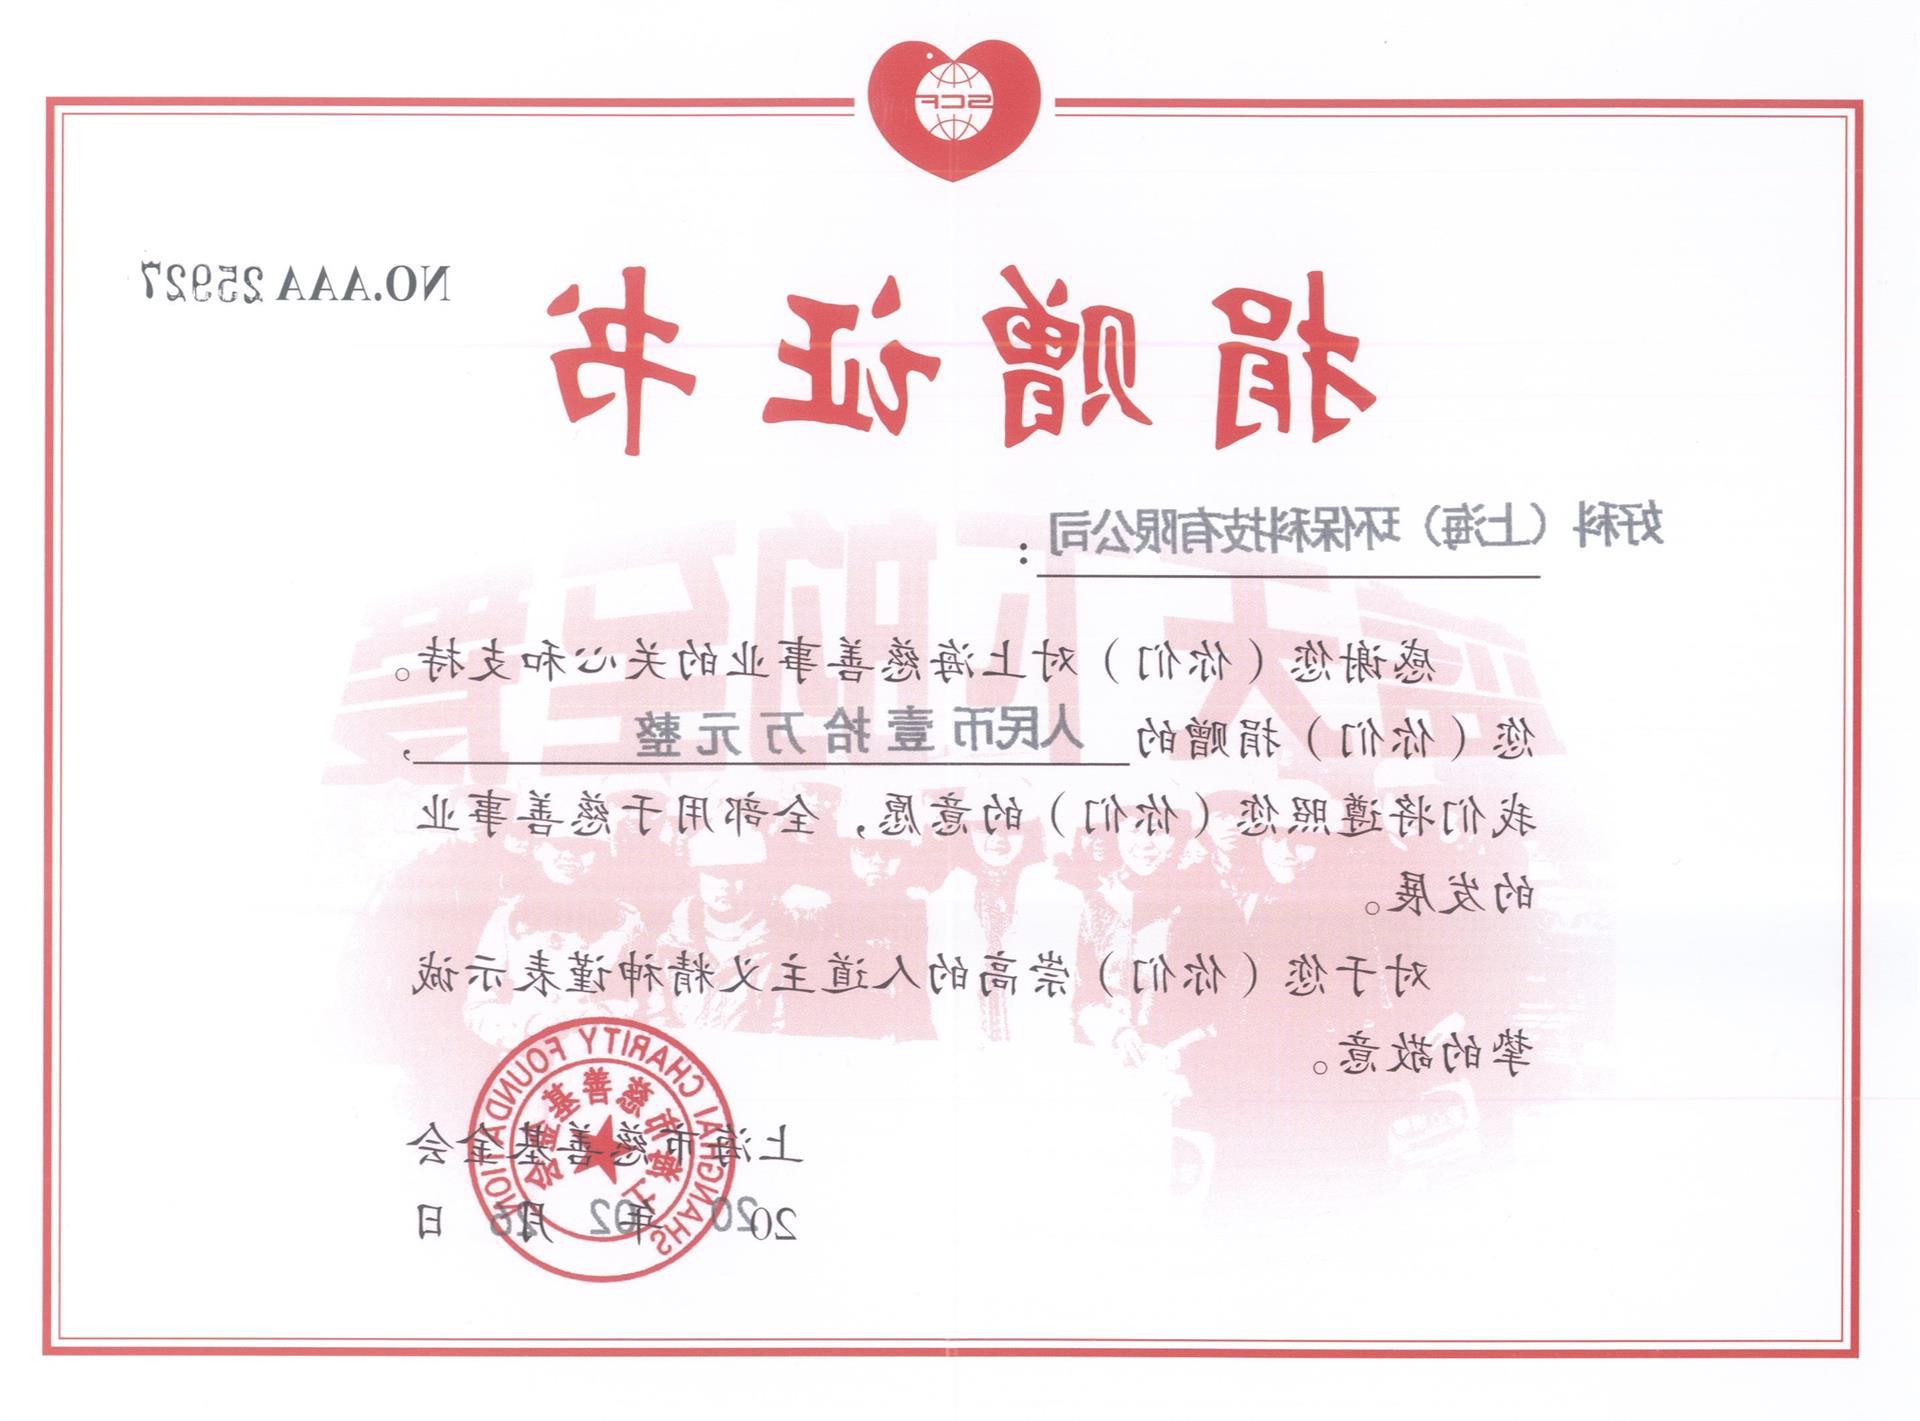 Donation to Wuhan in 2020